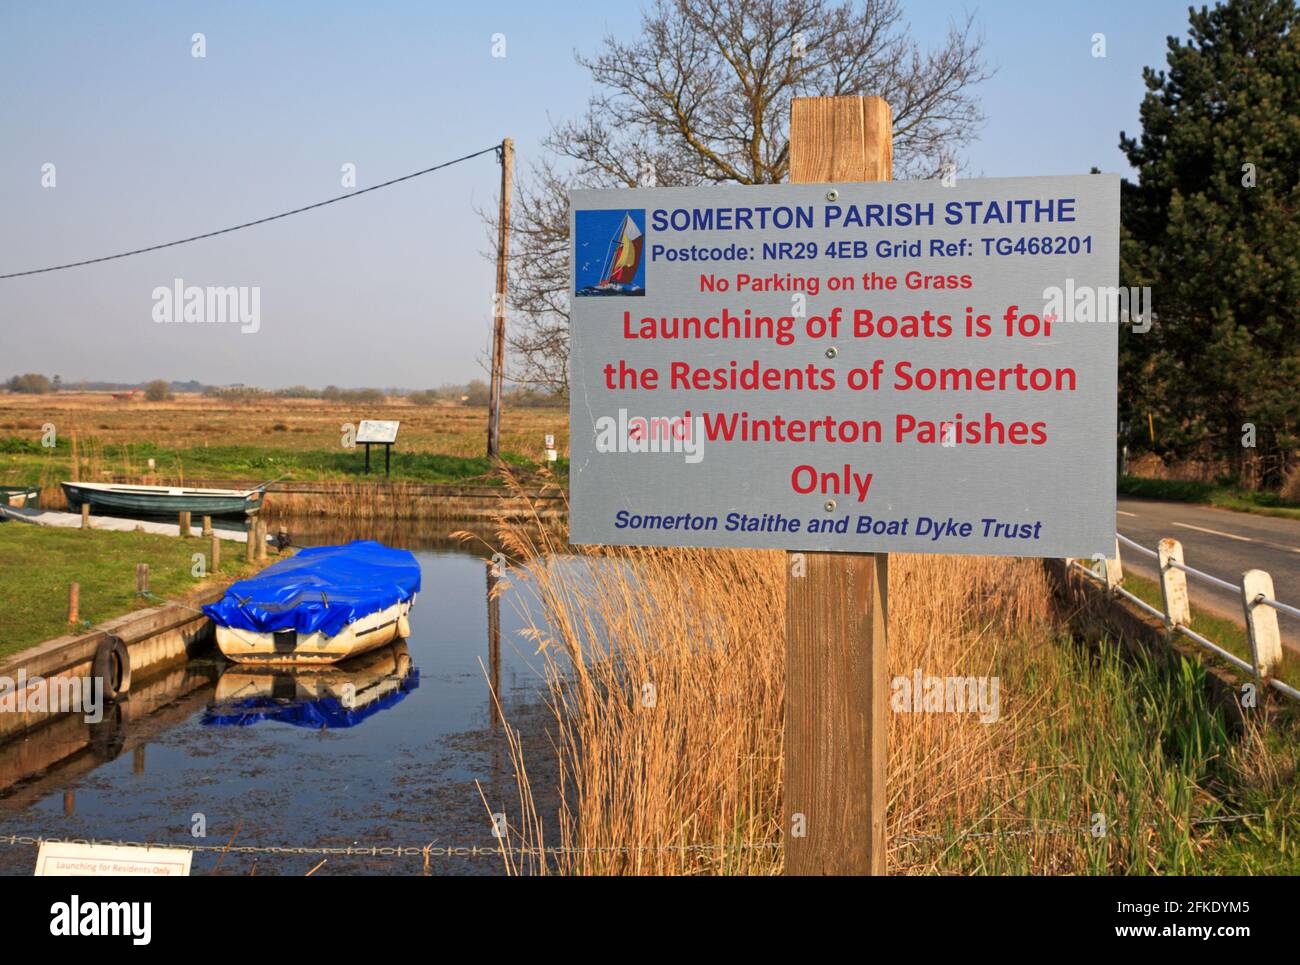 A notice at Somerton Parish Staithe detailing residents boat launching access at West Somerton, Norfolk, England, United Kingdom. Stock Photo